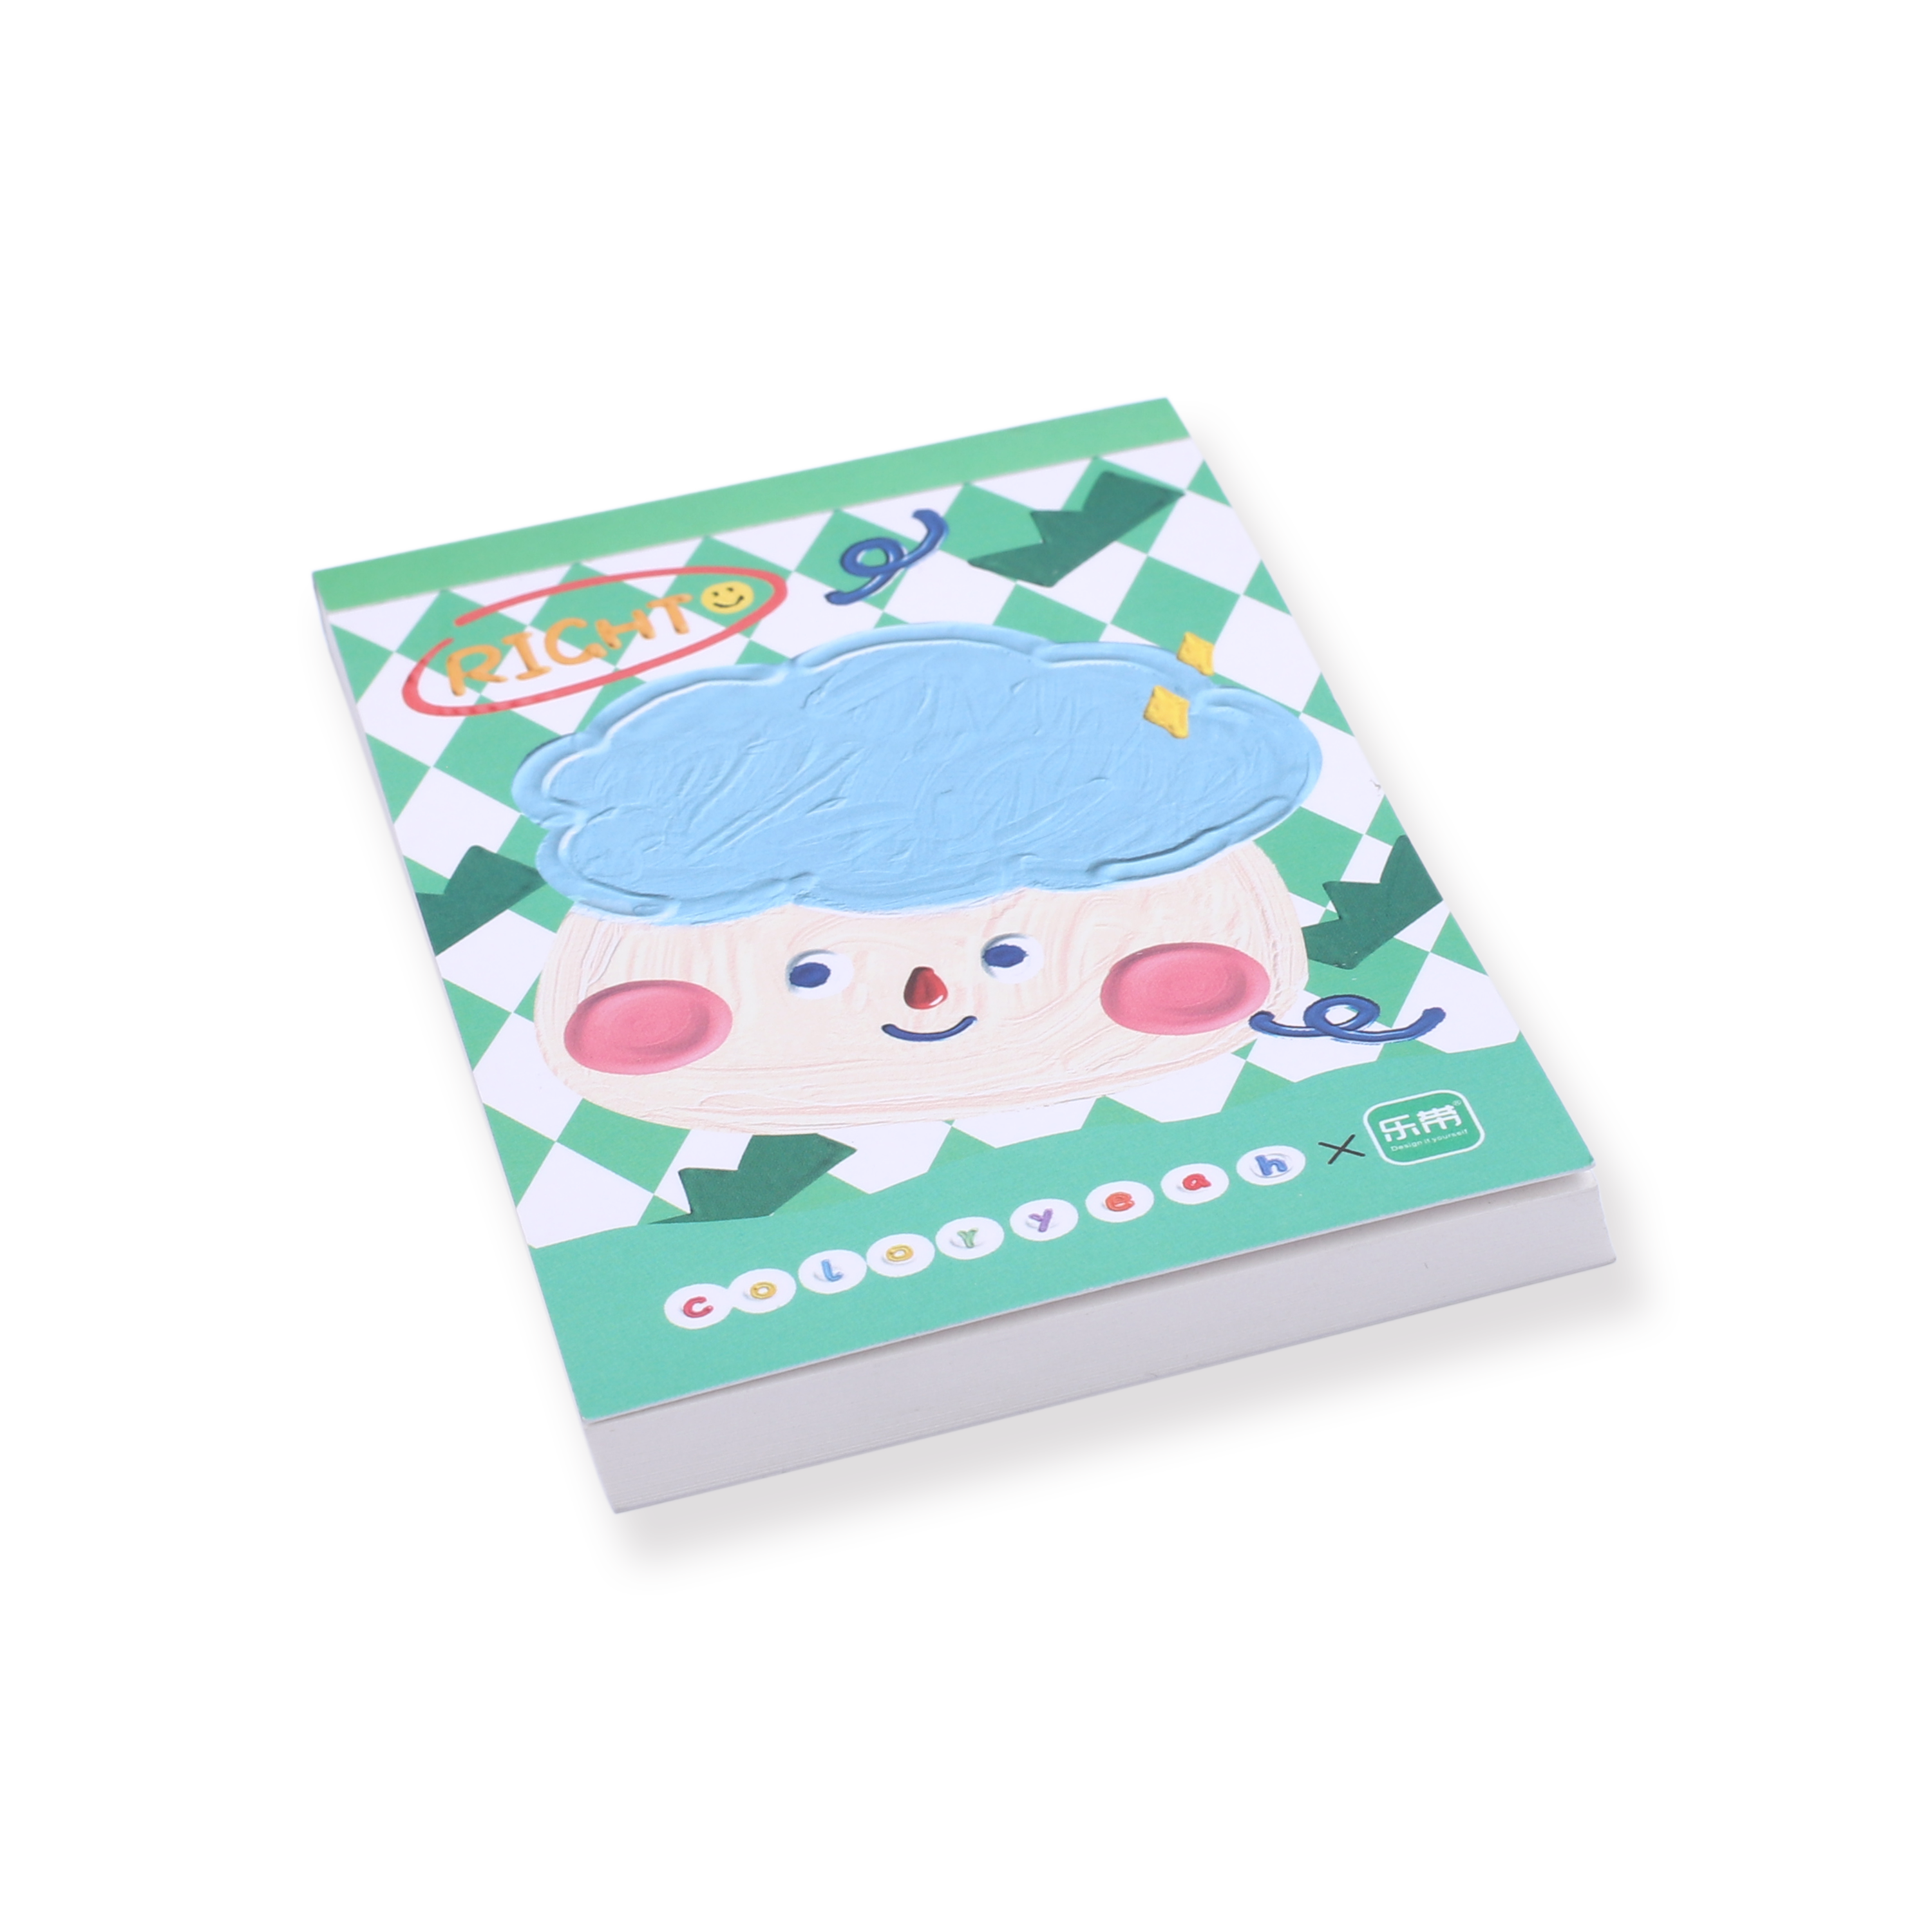 Cuttie Notepad - A7 - Green - Stationery Pal